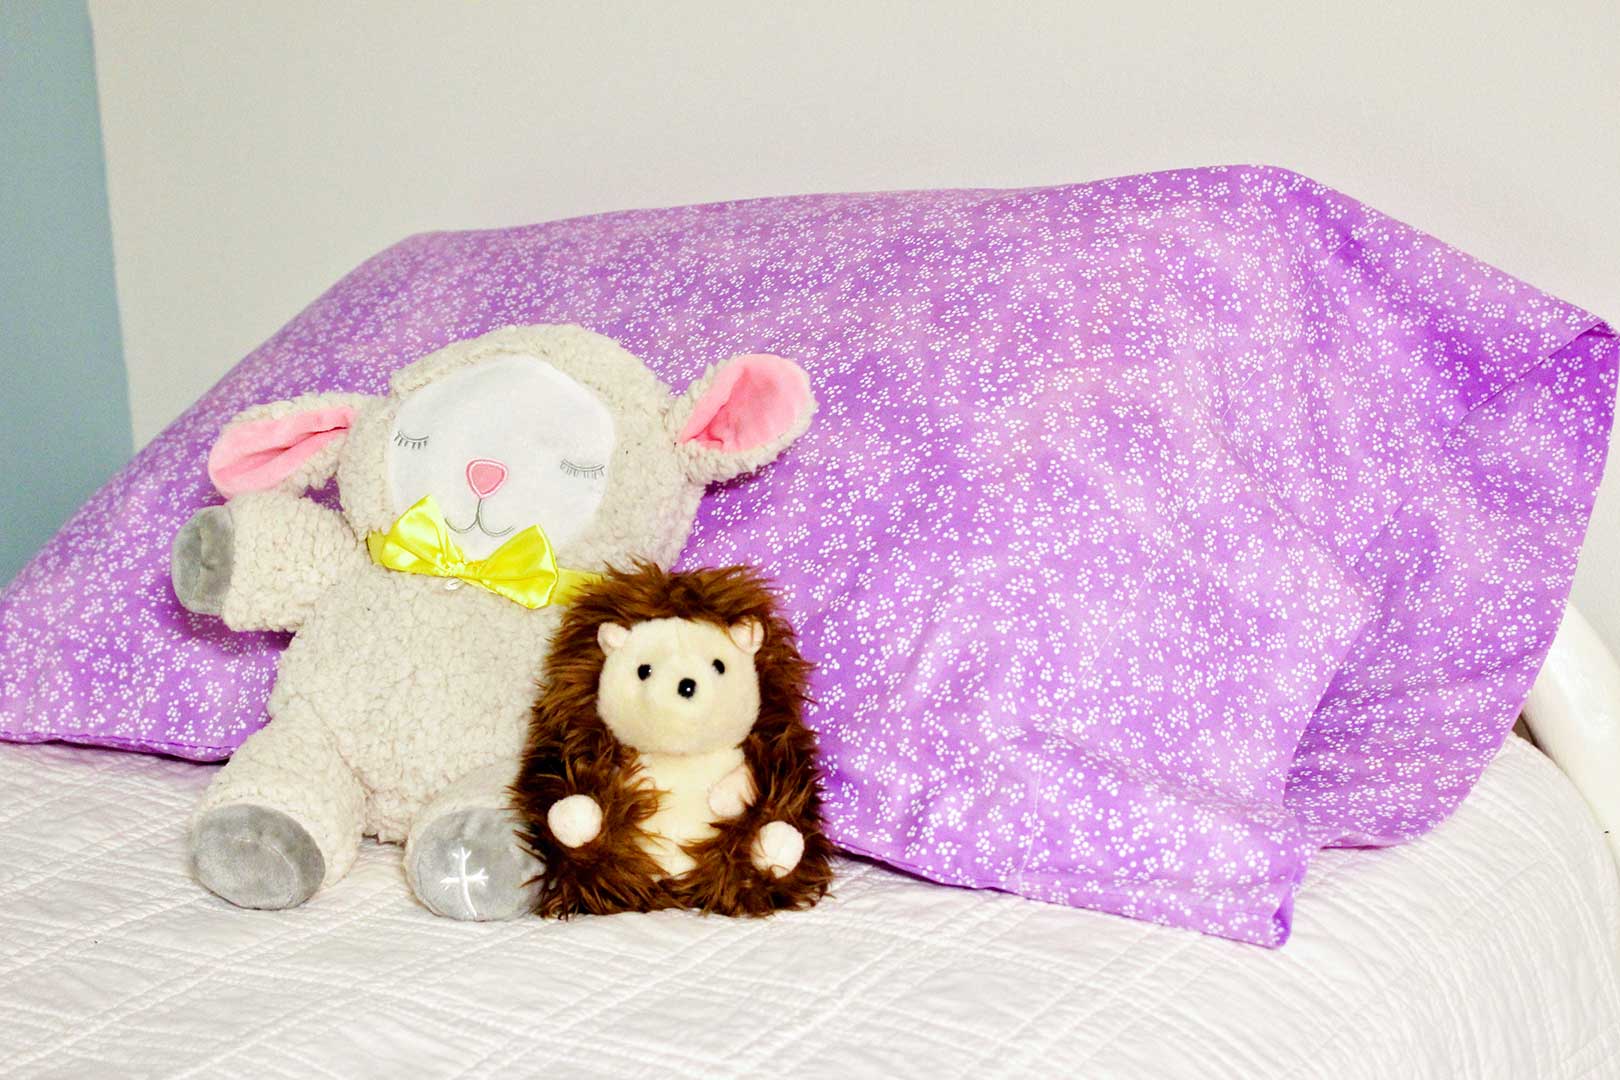 Completed pillowcase on a bed with two stuffed animals resting on it.